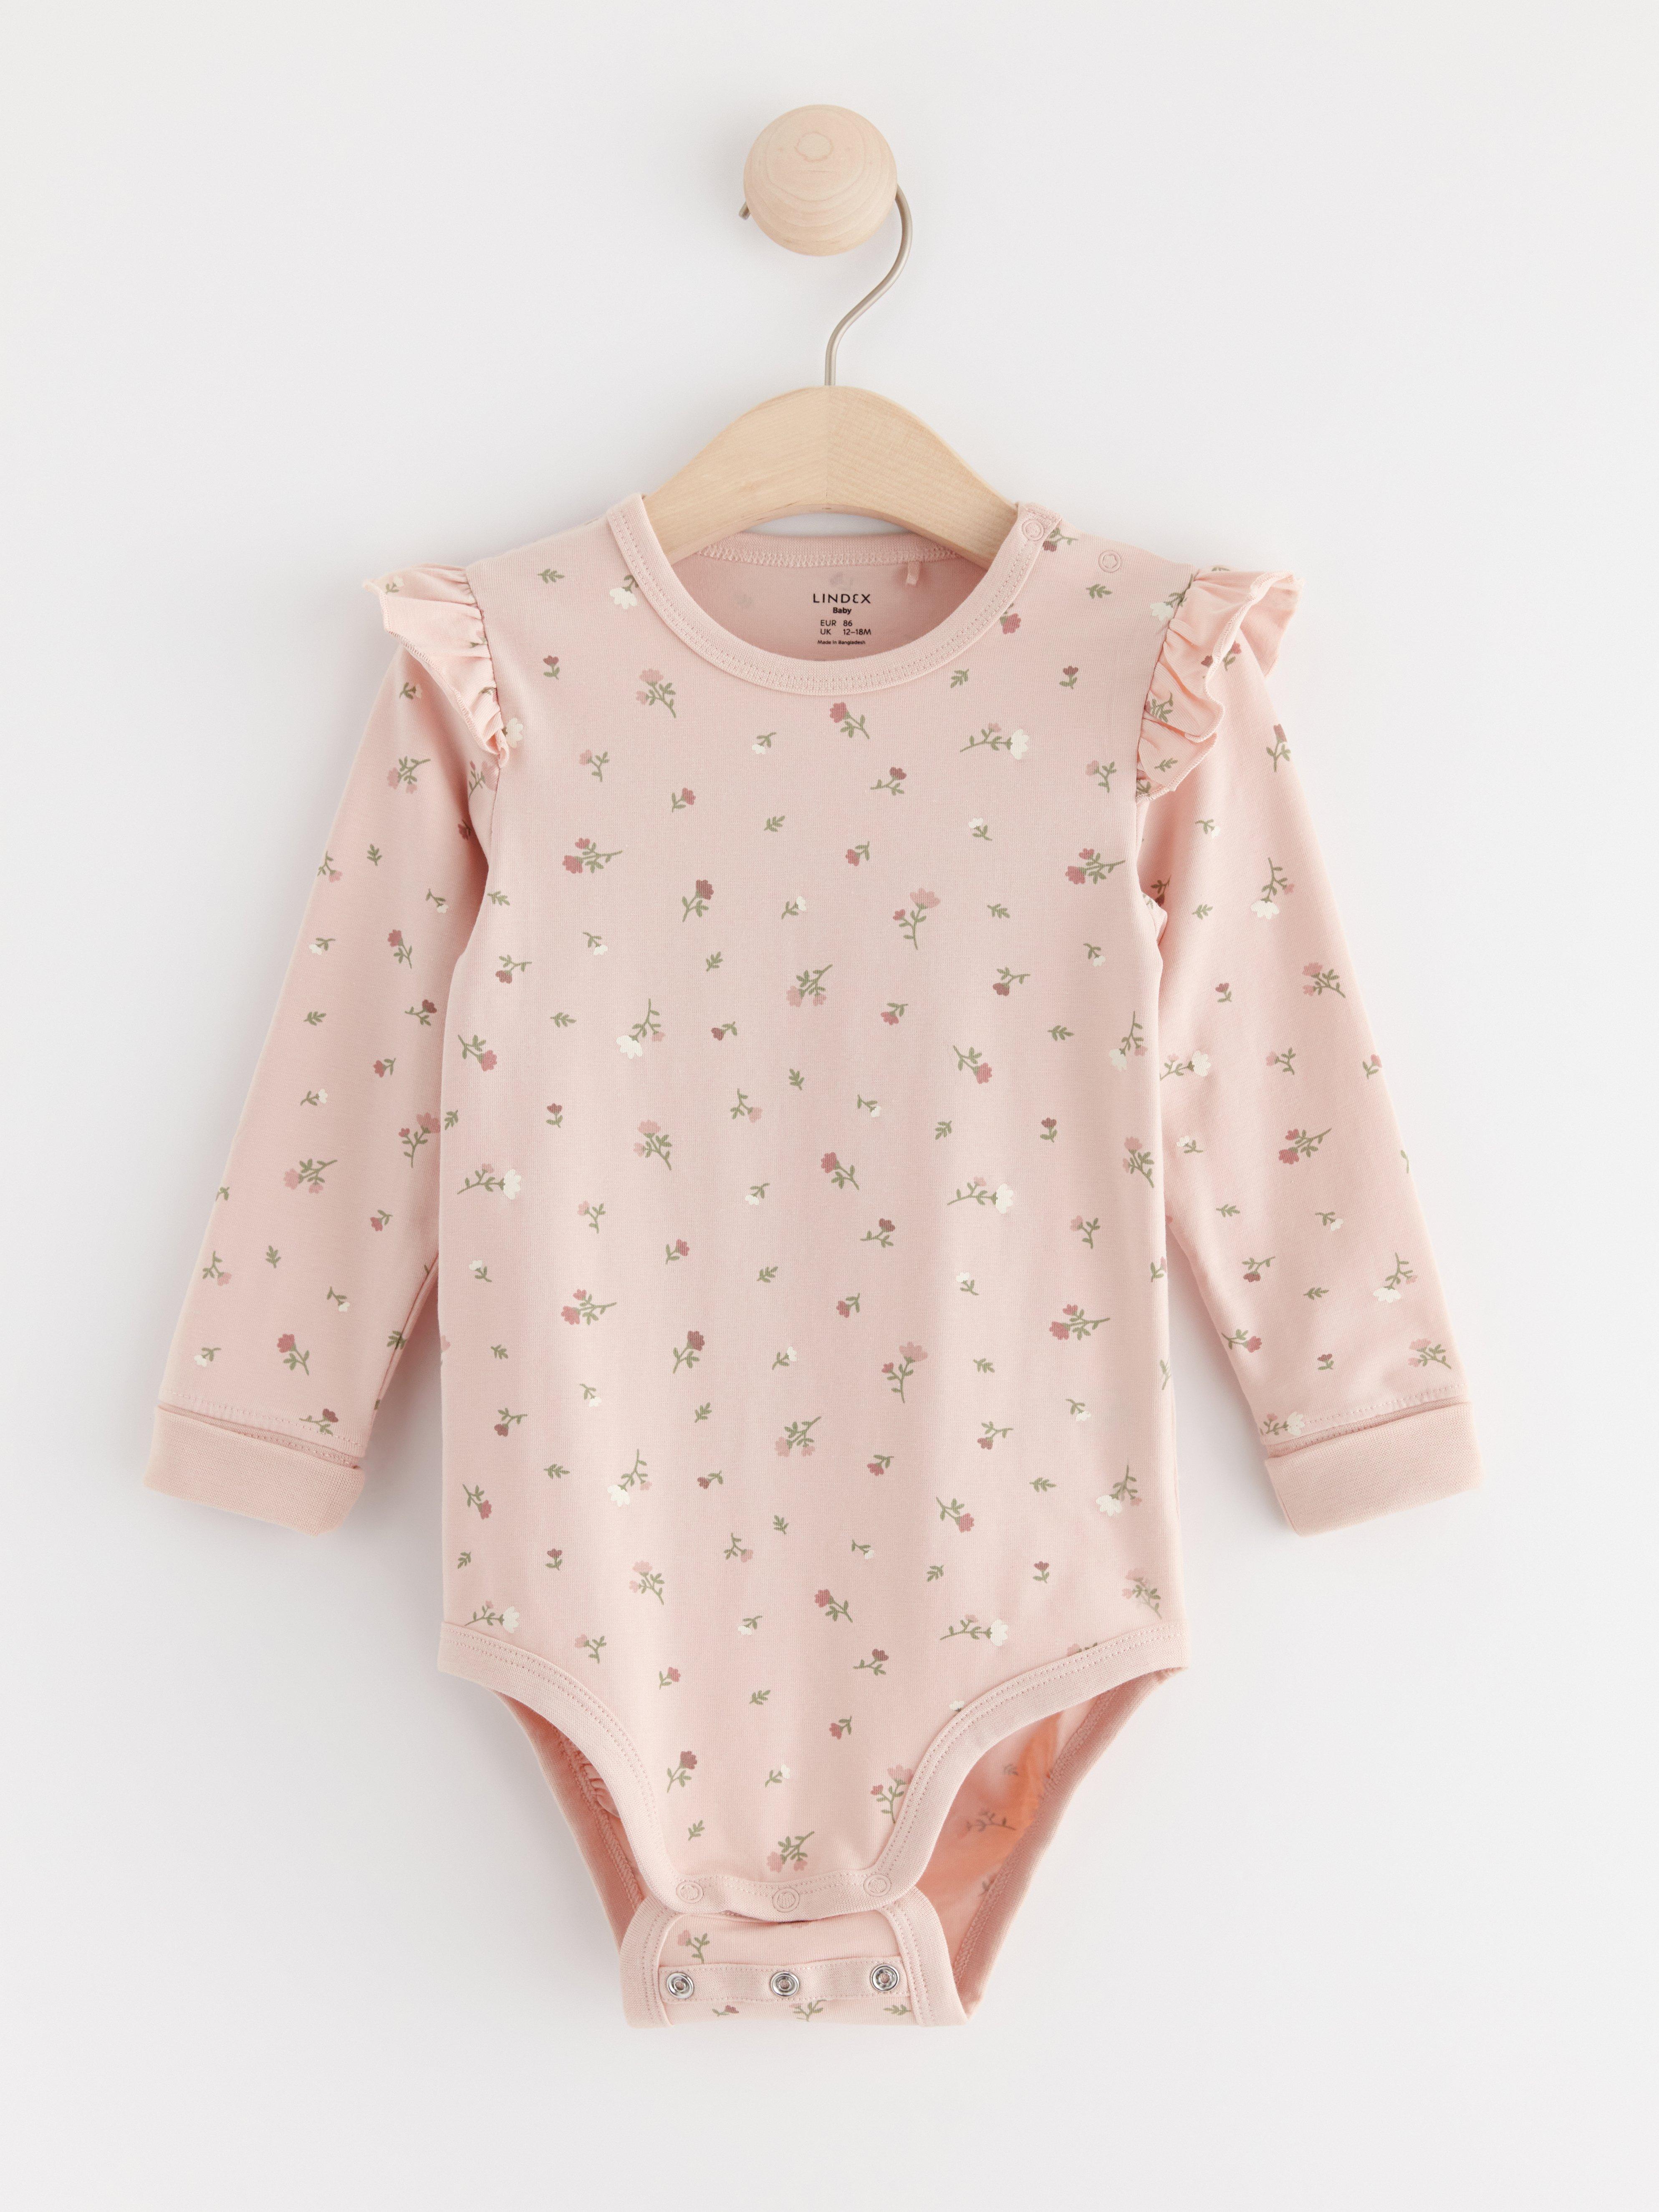 Lindex Bodysuits sale - discounted price